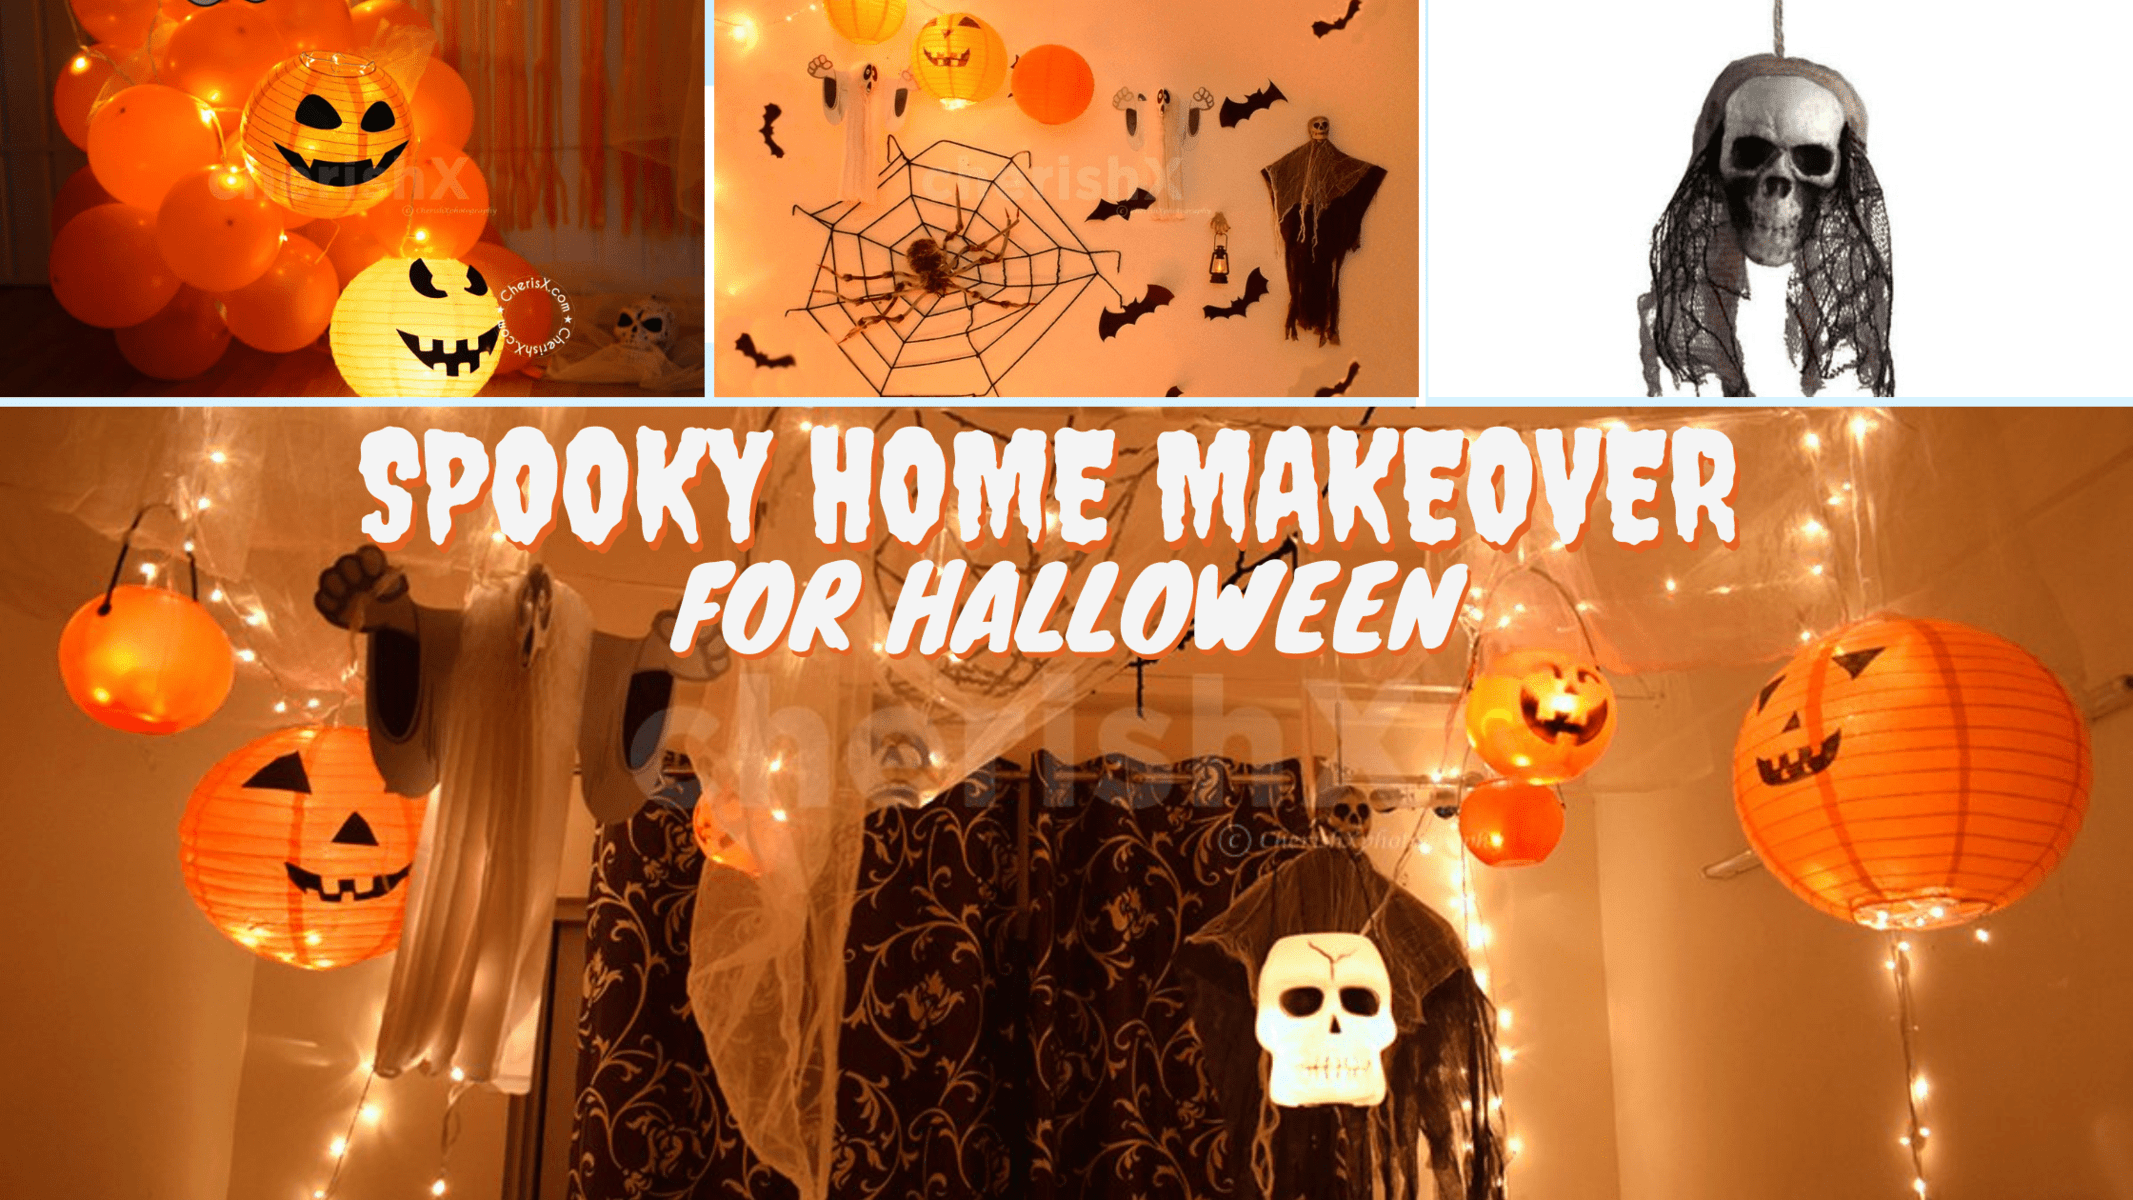 Must Try Spooky Halloween Decoration Ideas for your Home | CherishX